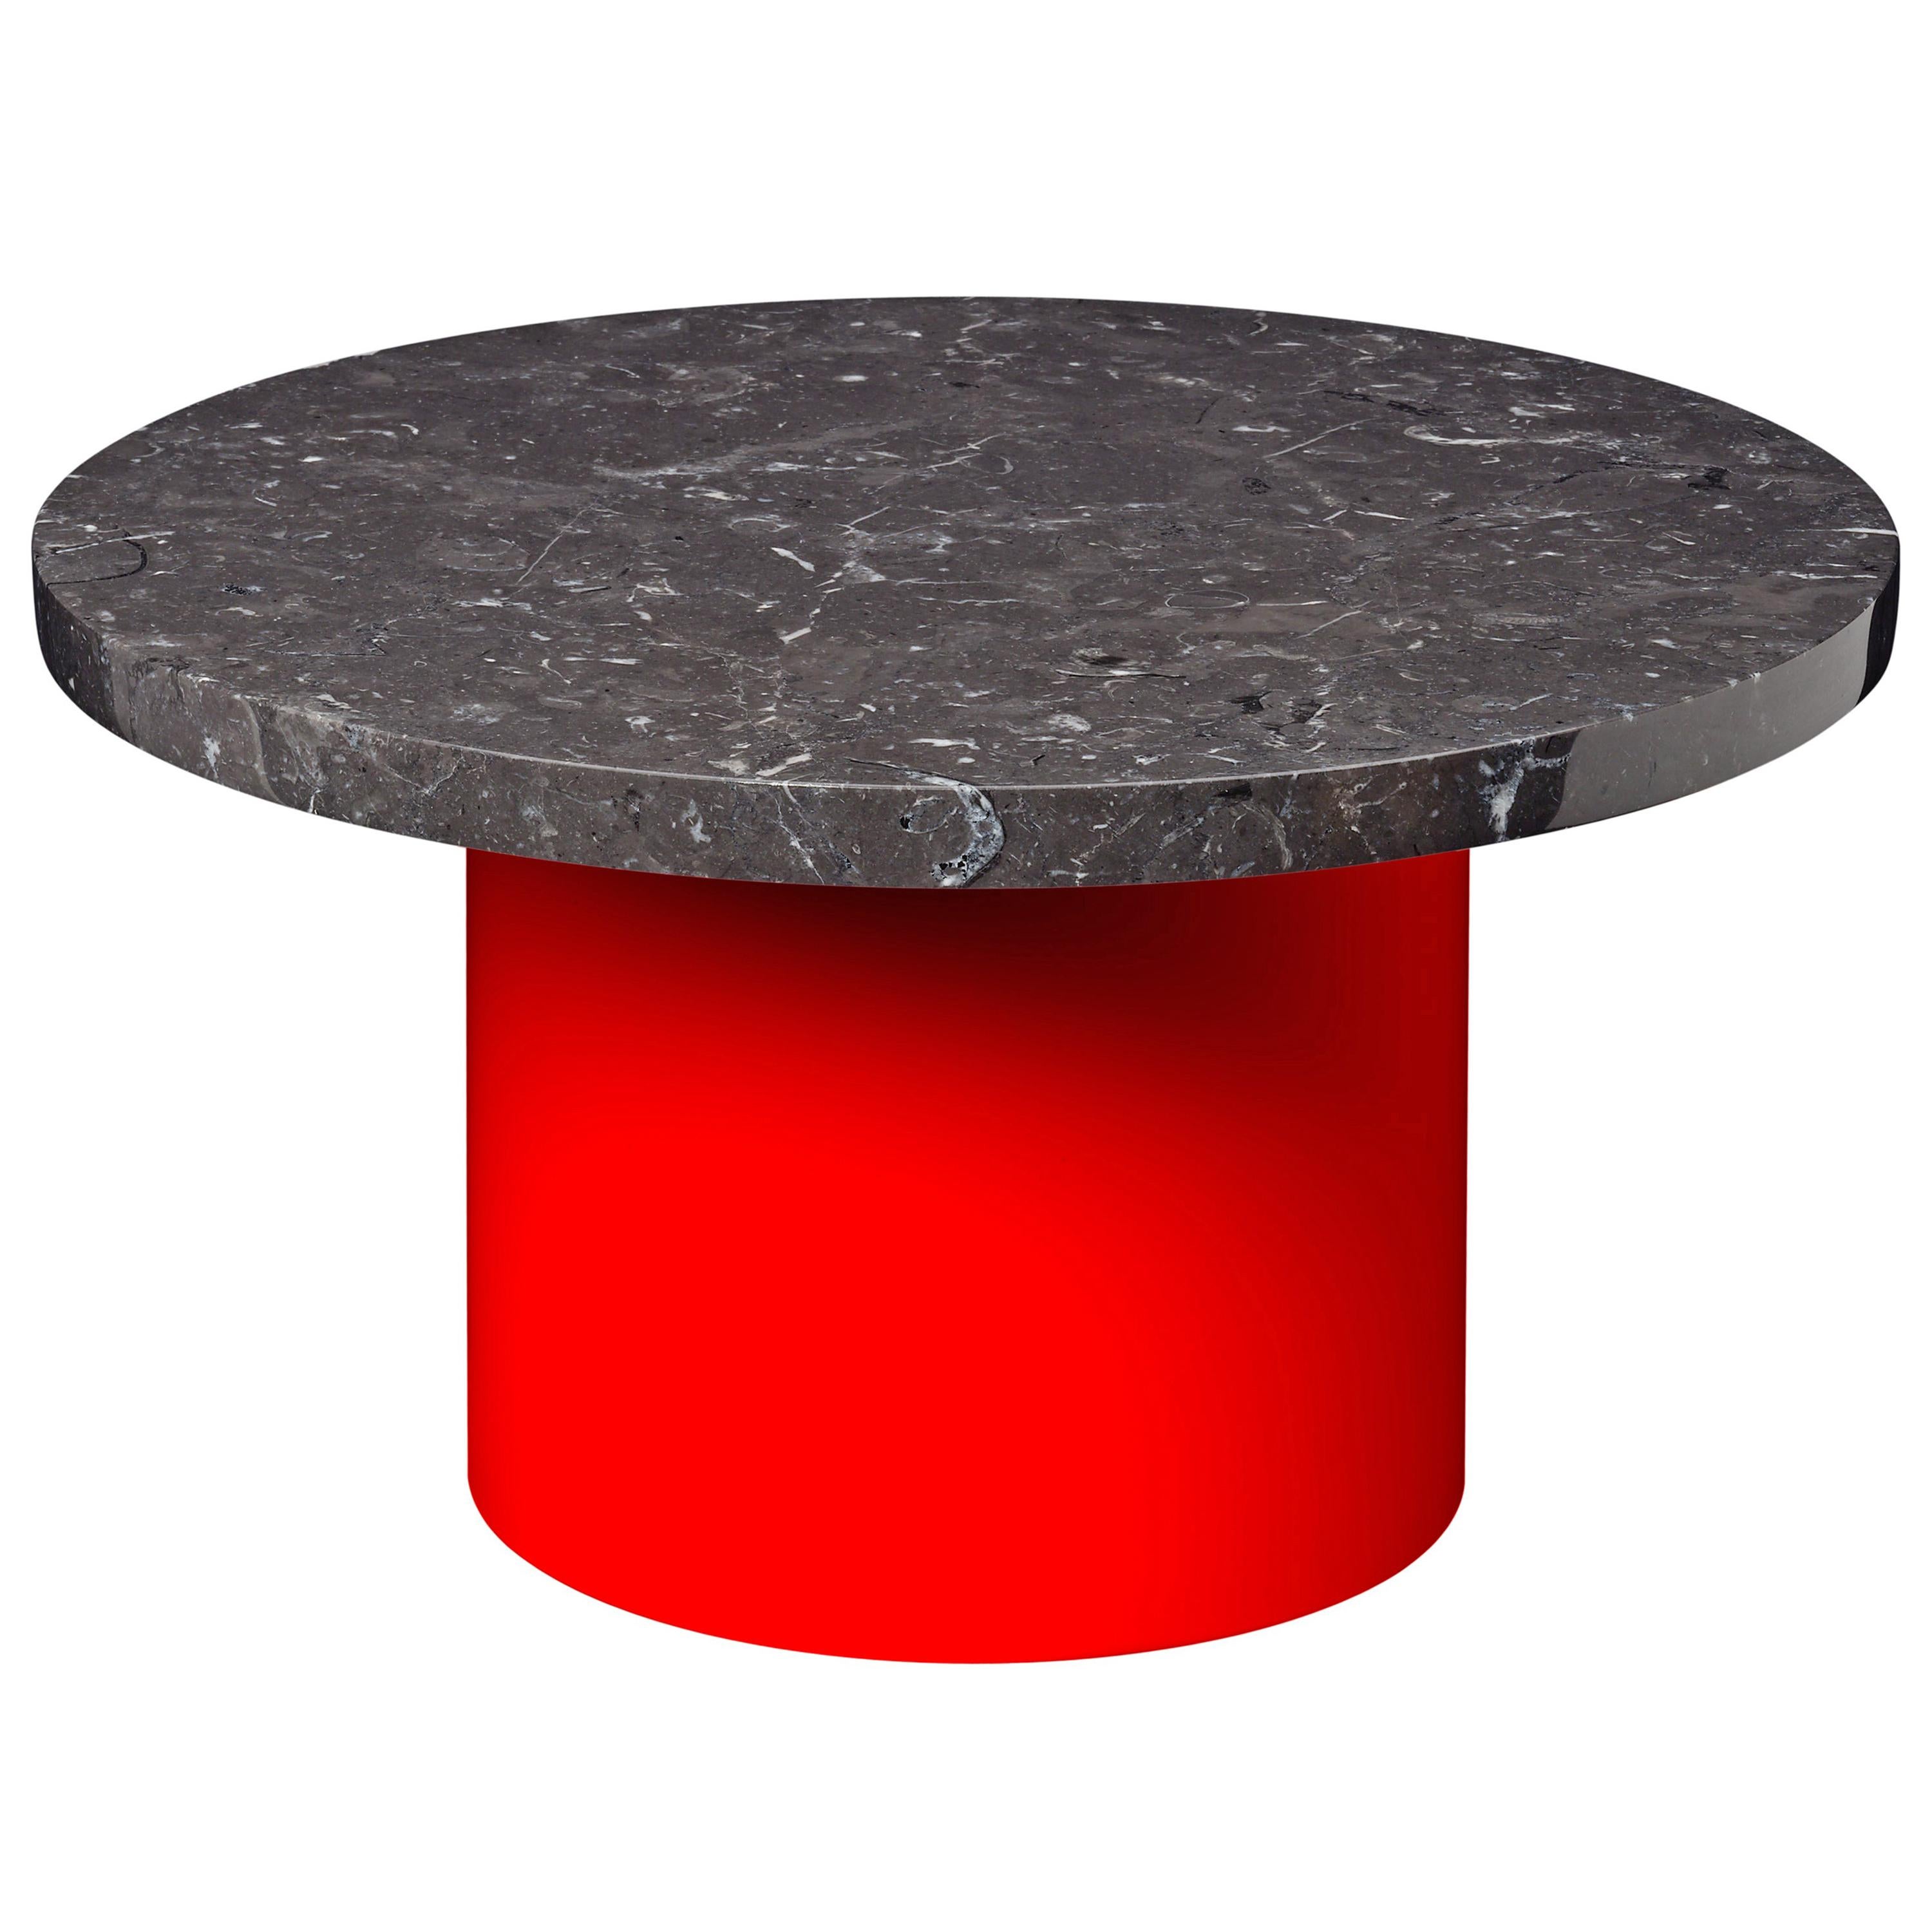 Black (Nero Marquina) e15 Enoki Side Table with Neon Red Base by Philipp Mainzer